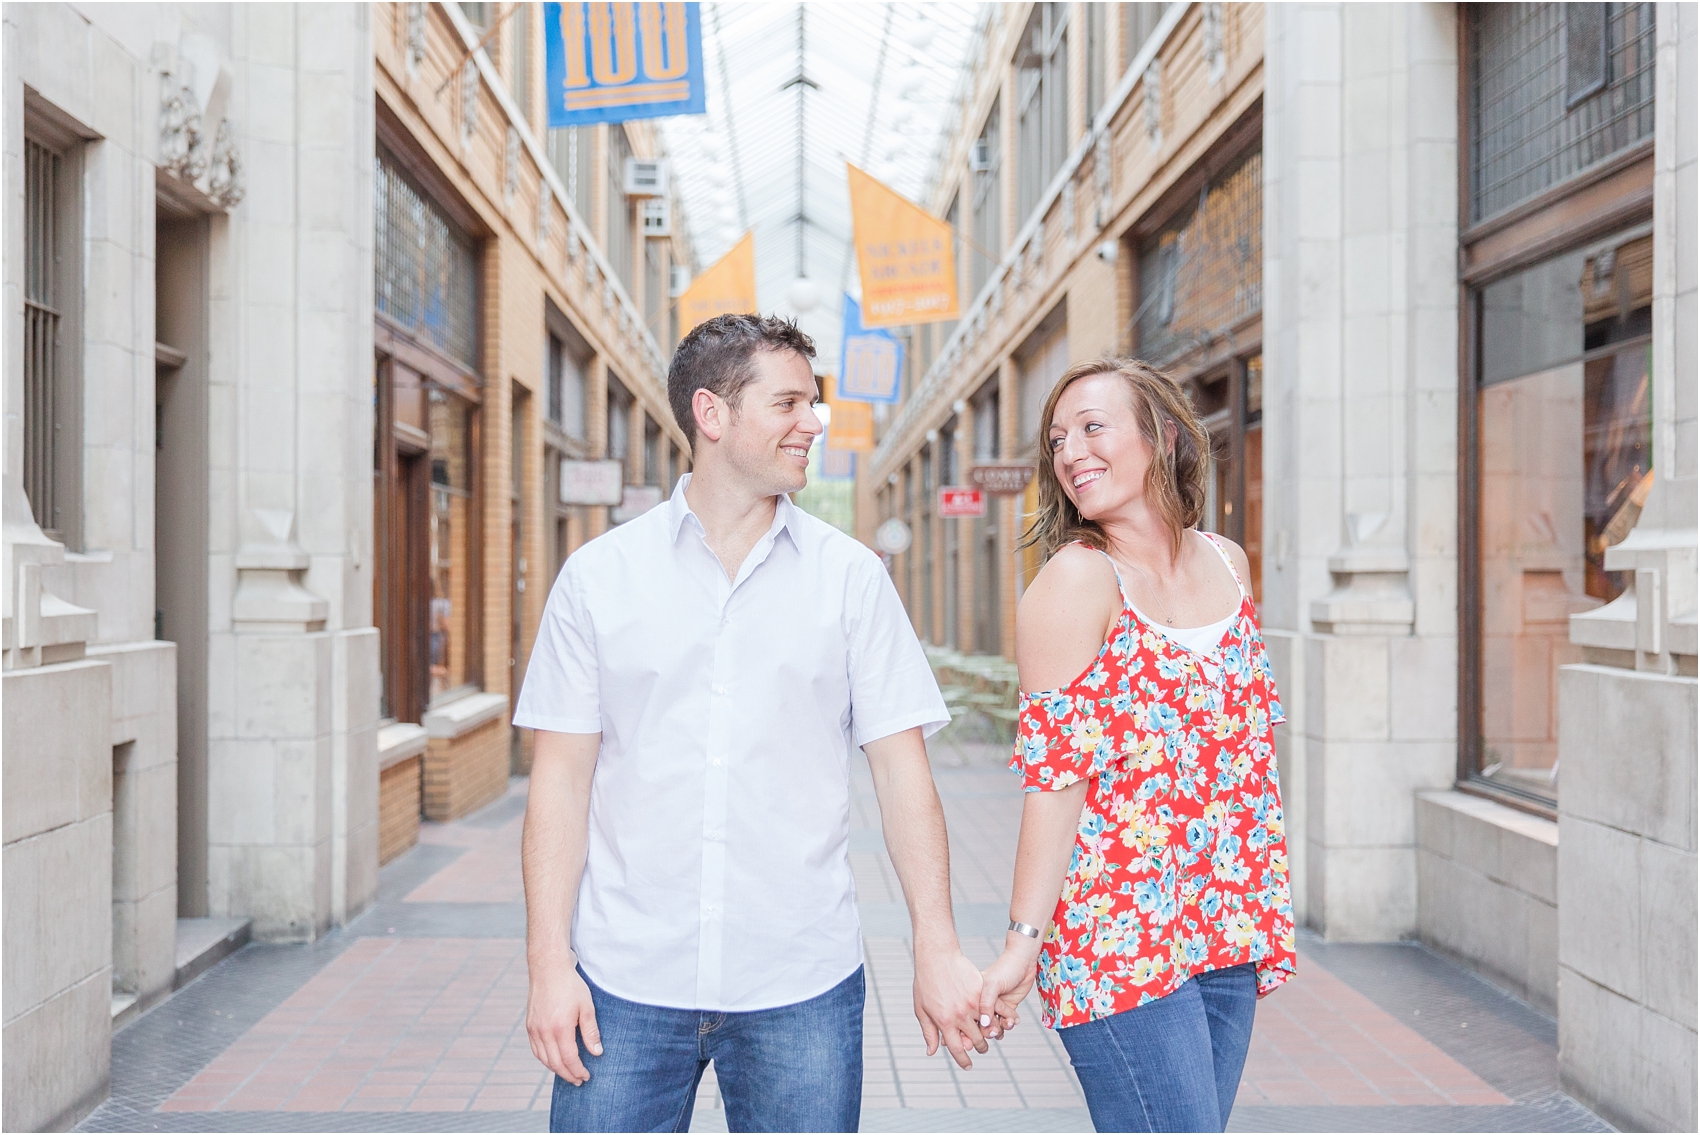 fun-adventurous-engagement-photos-at-the-nickels-arcade-in-ann-arbor-mi-by-courtney-carolyn-photography_0017.jpg